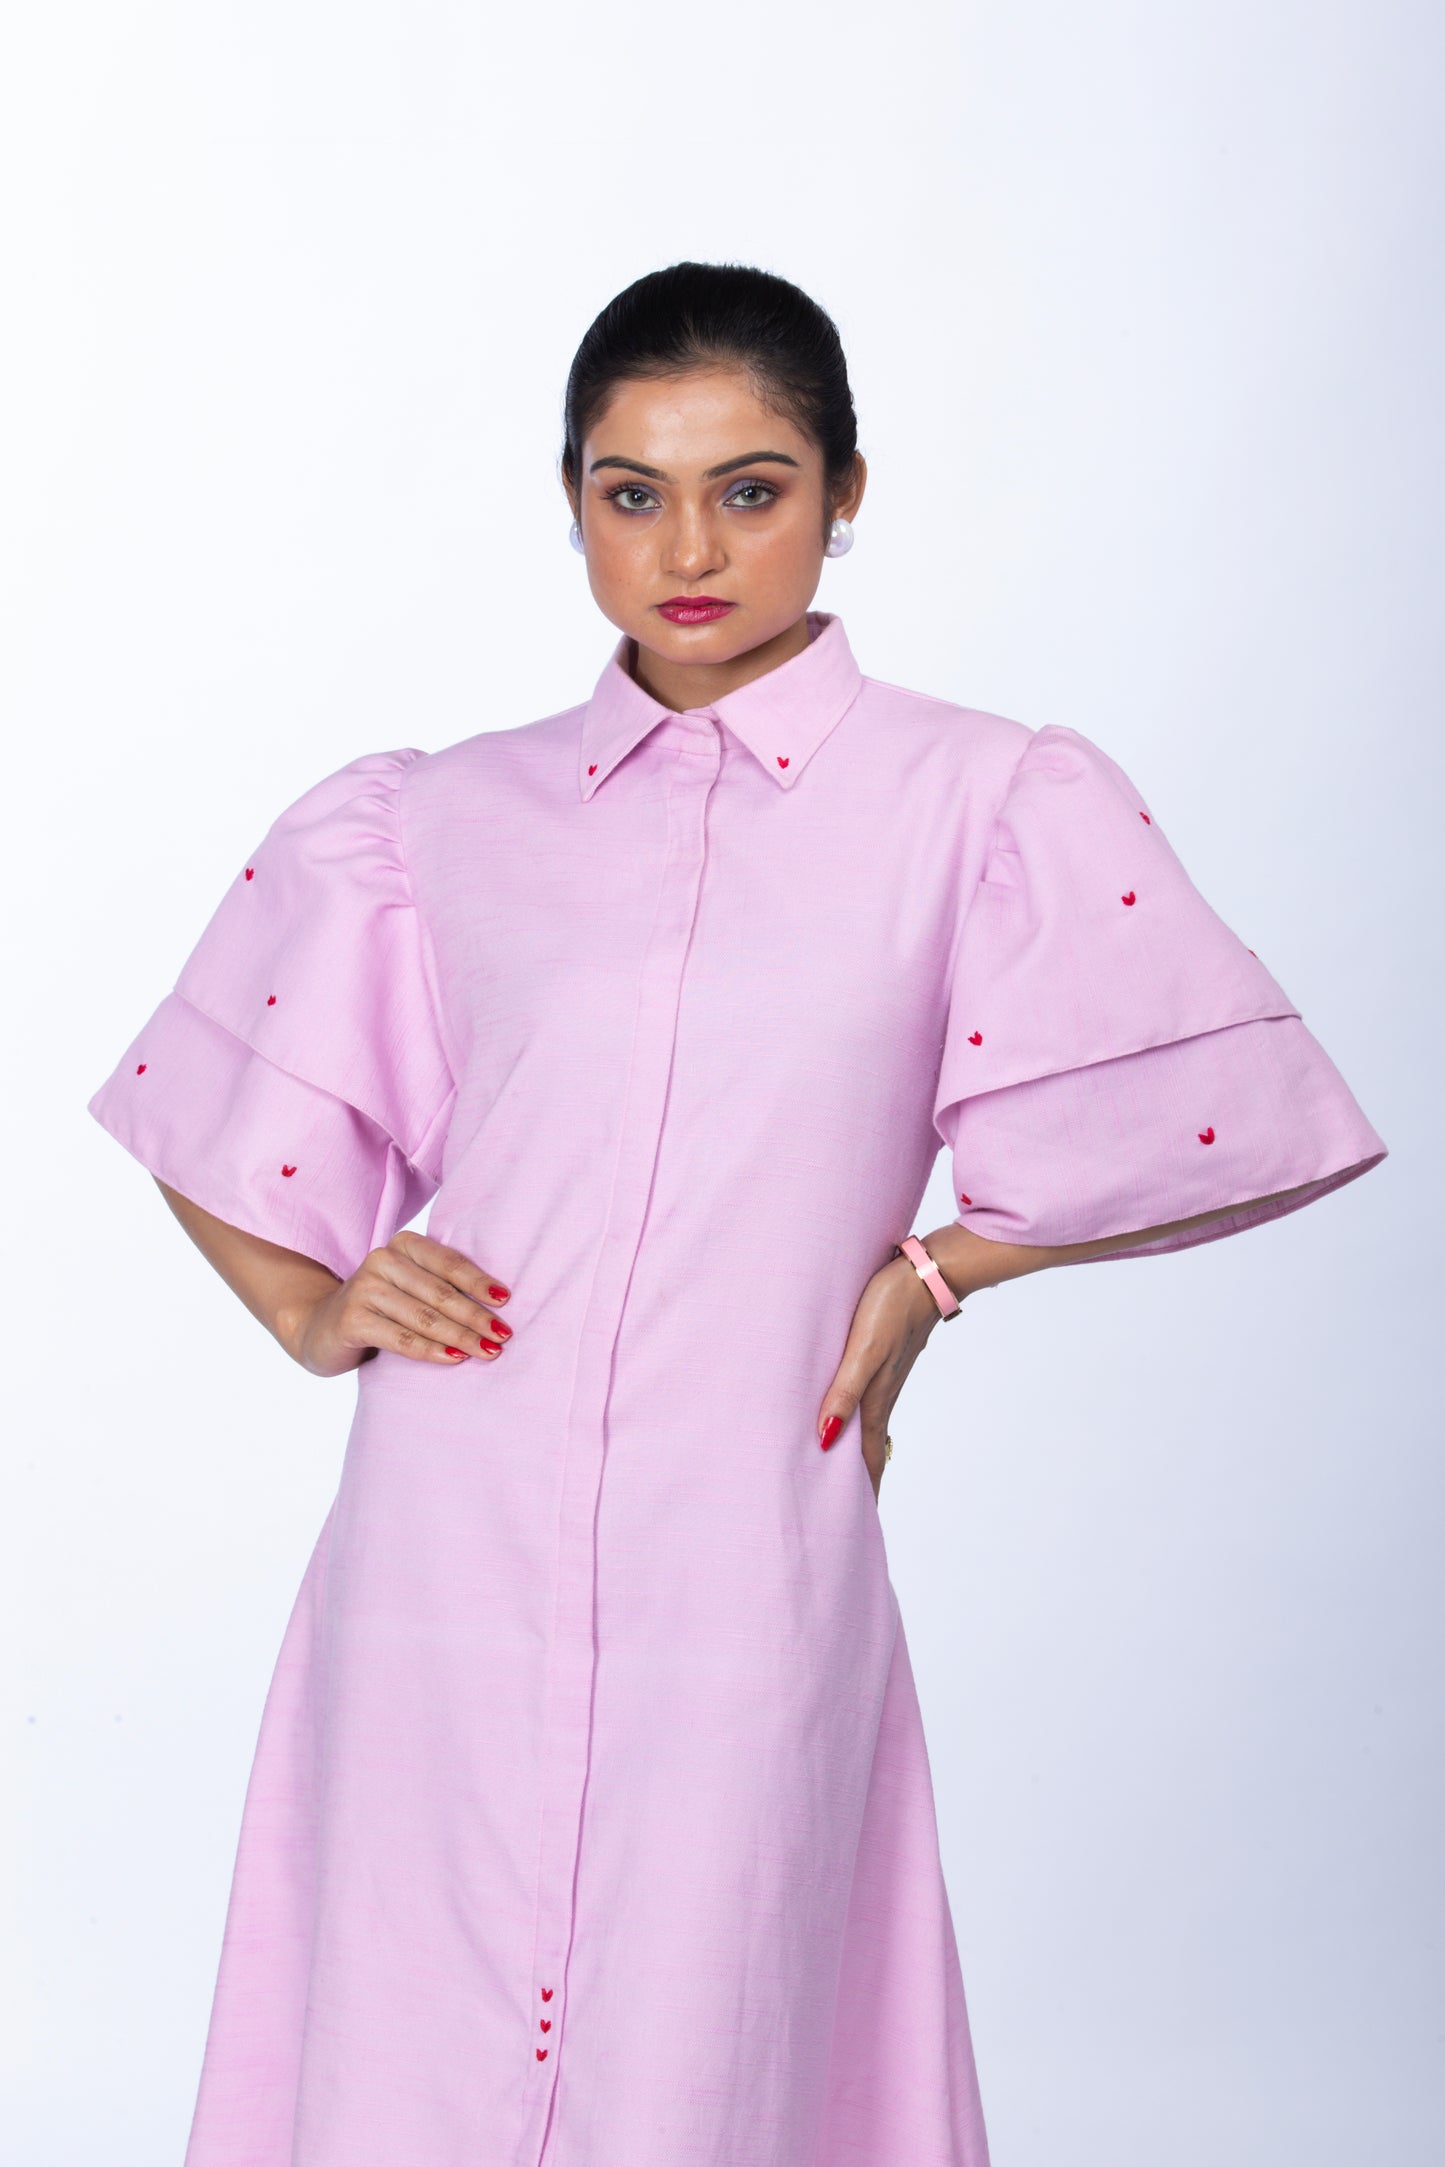 SS02 Pink A-line dress with layered sleeves